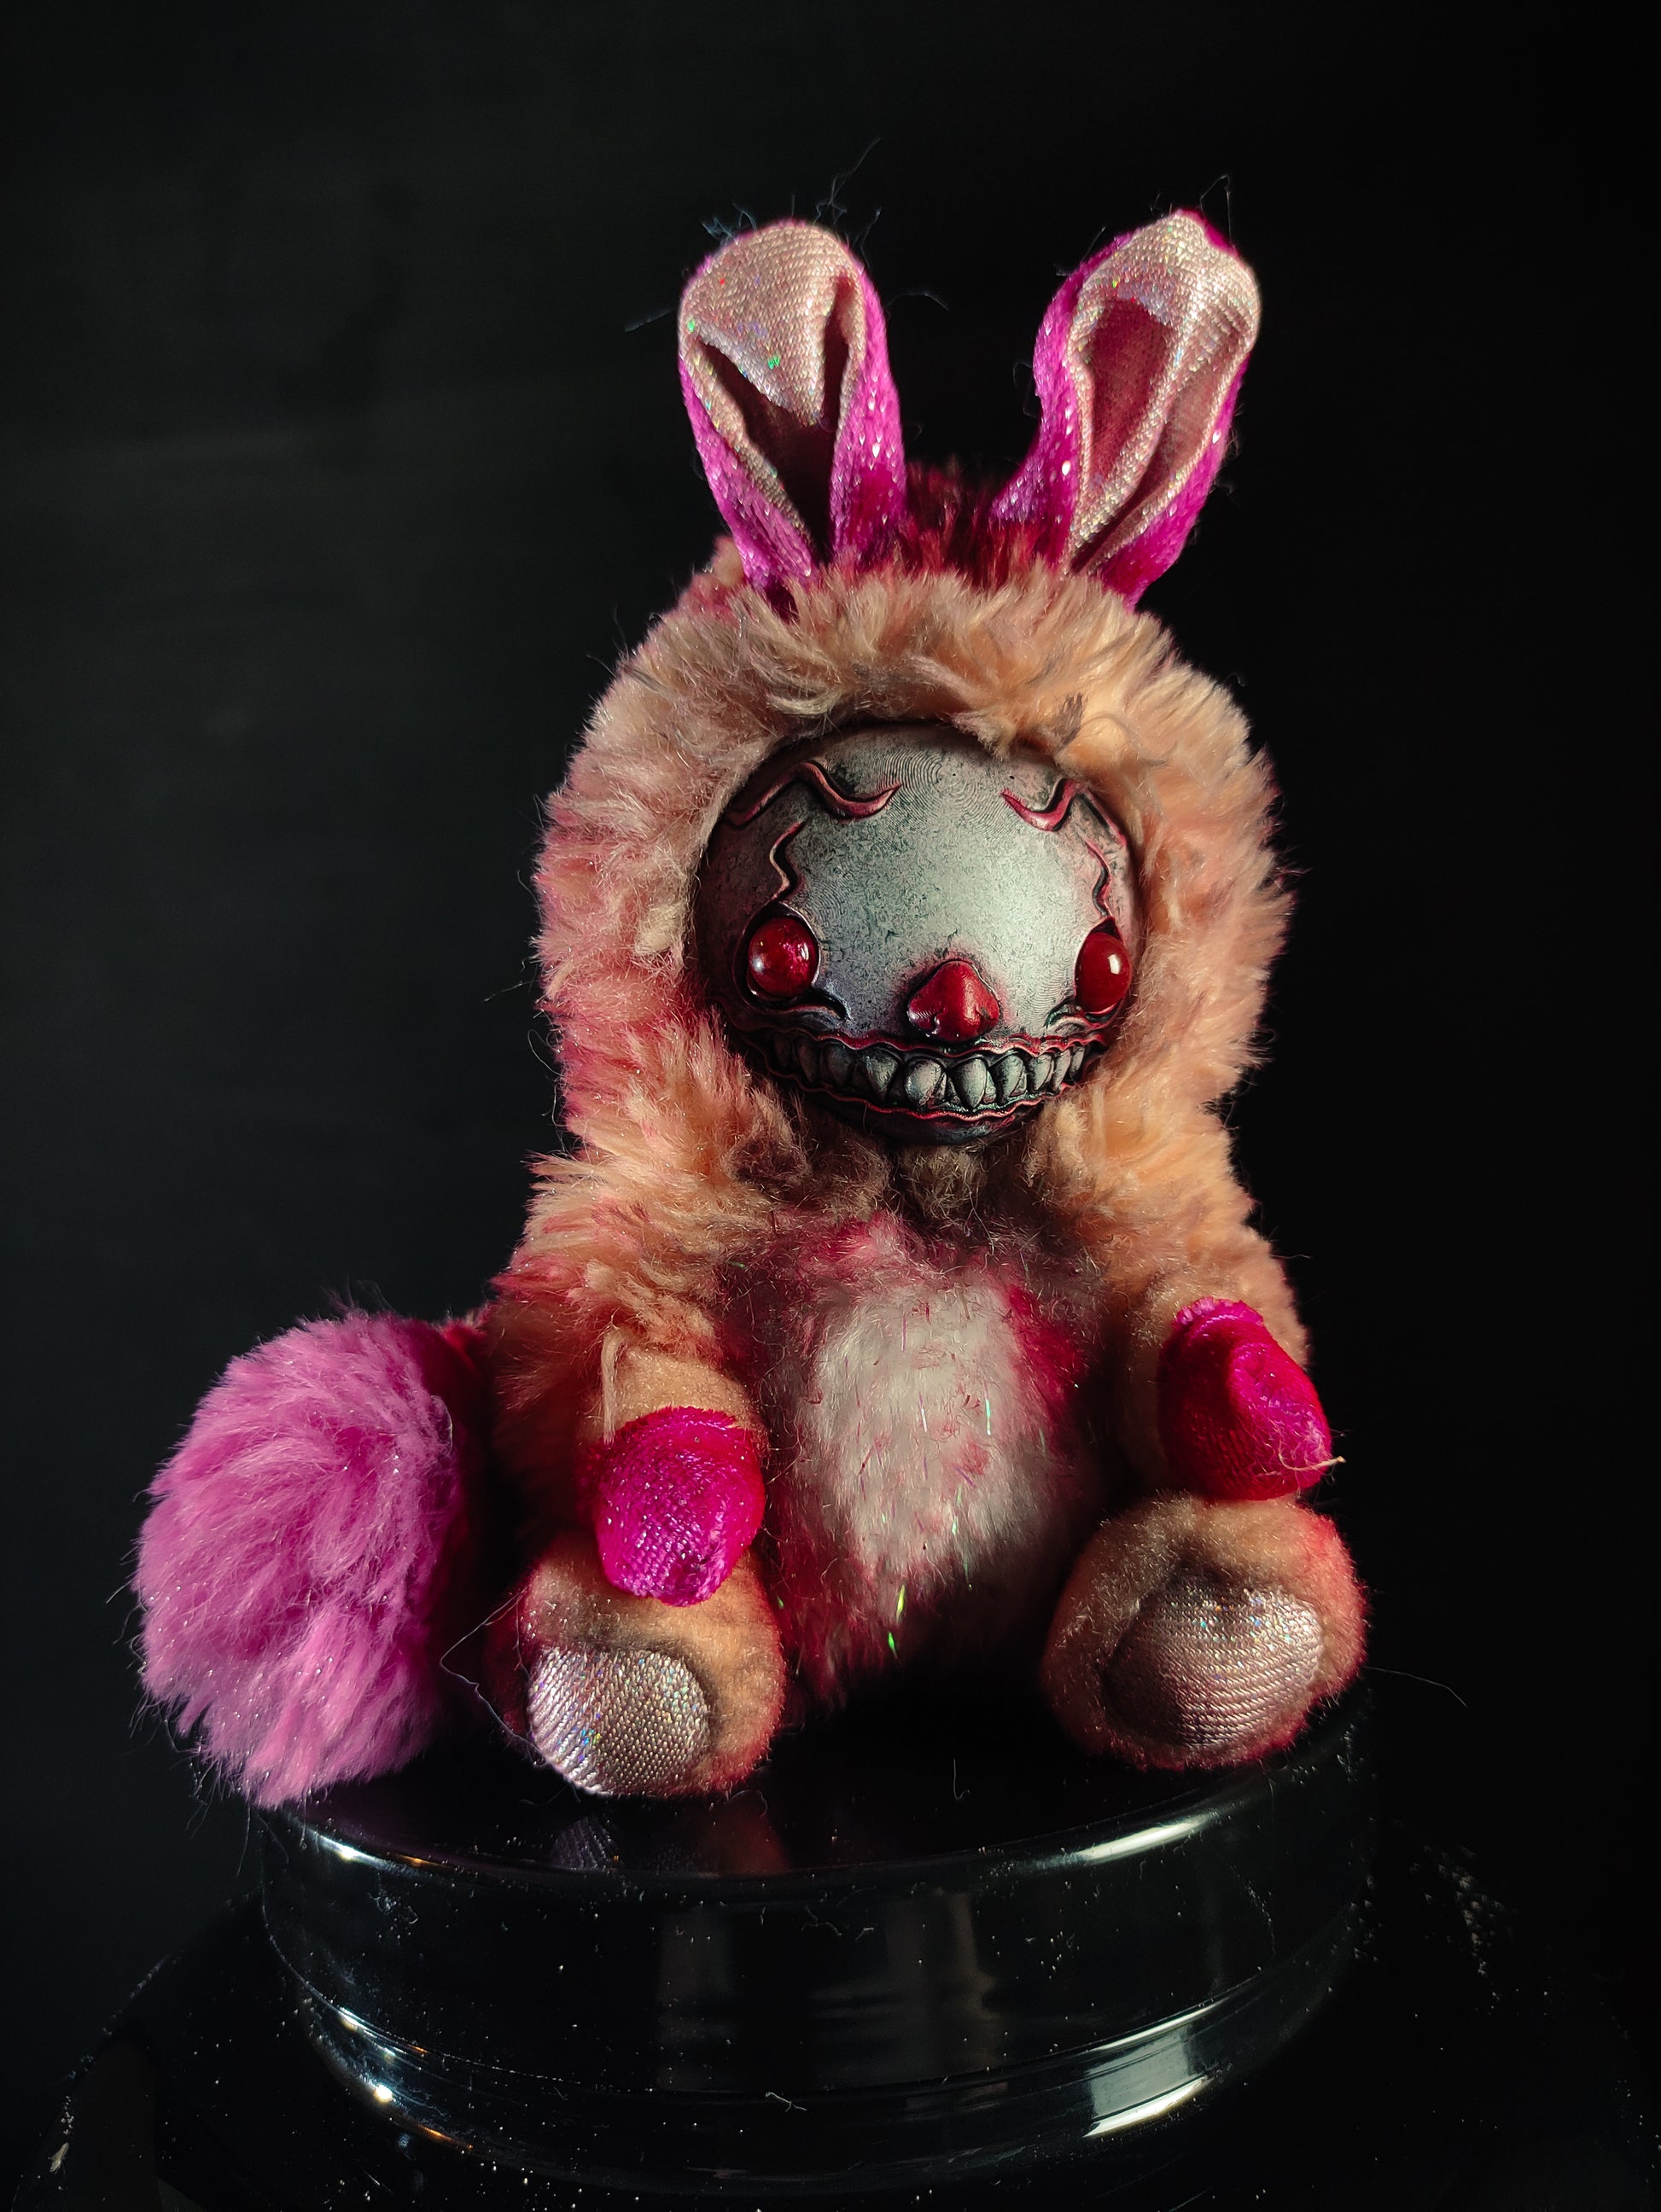 FRIEND² Pantomime Punch - Cryptid Art Doll Plush Toy